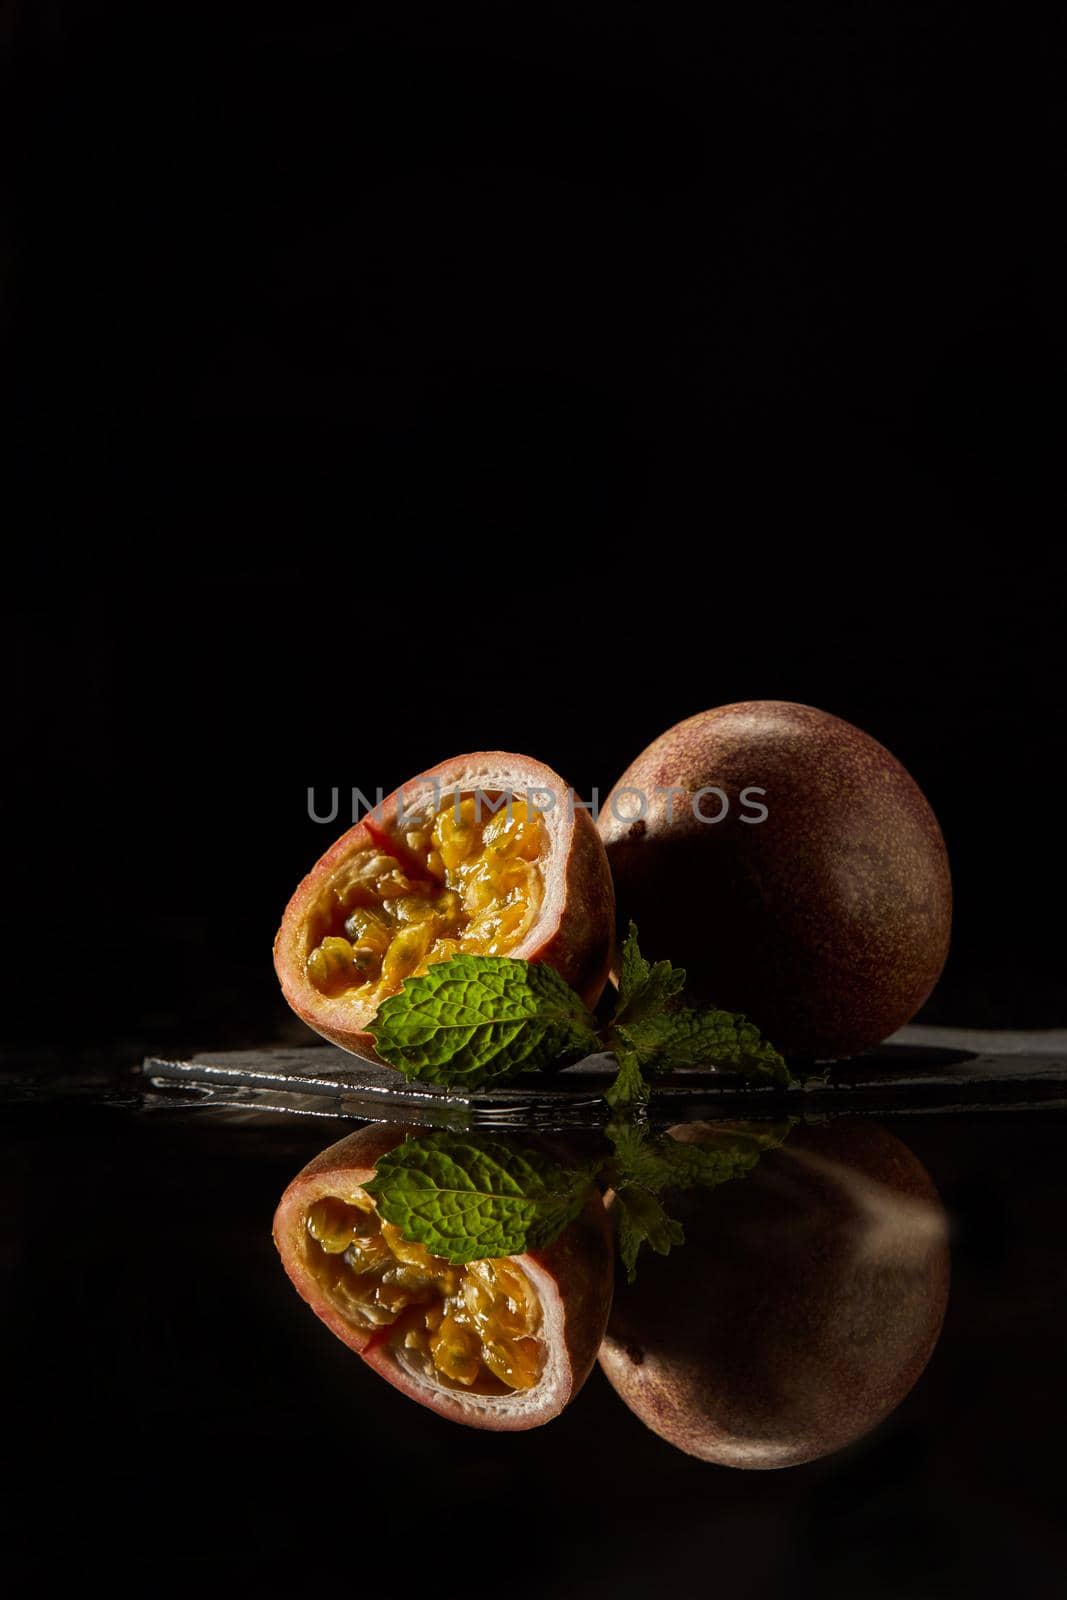 Still life with Passion fruit by Wasant